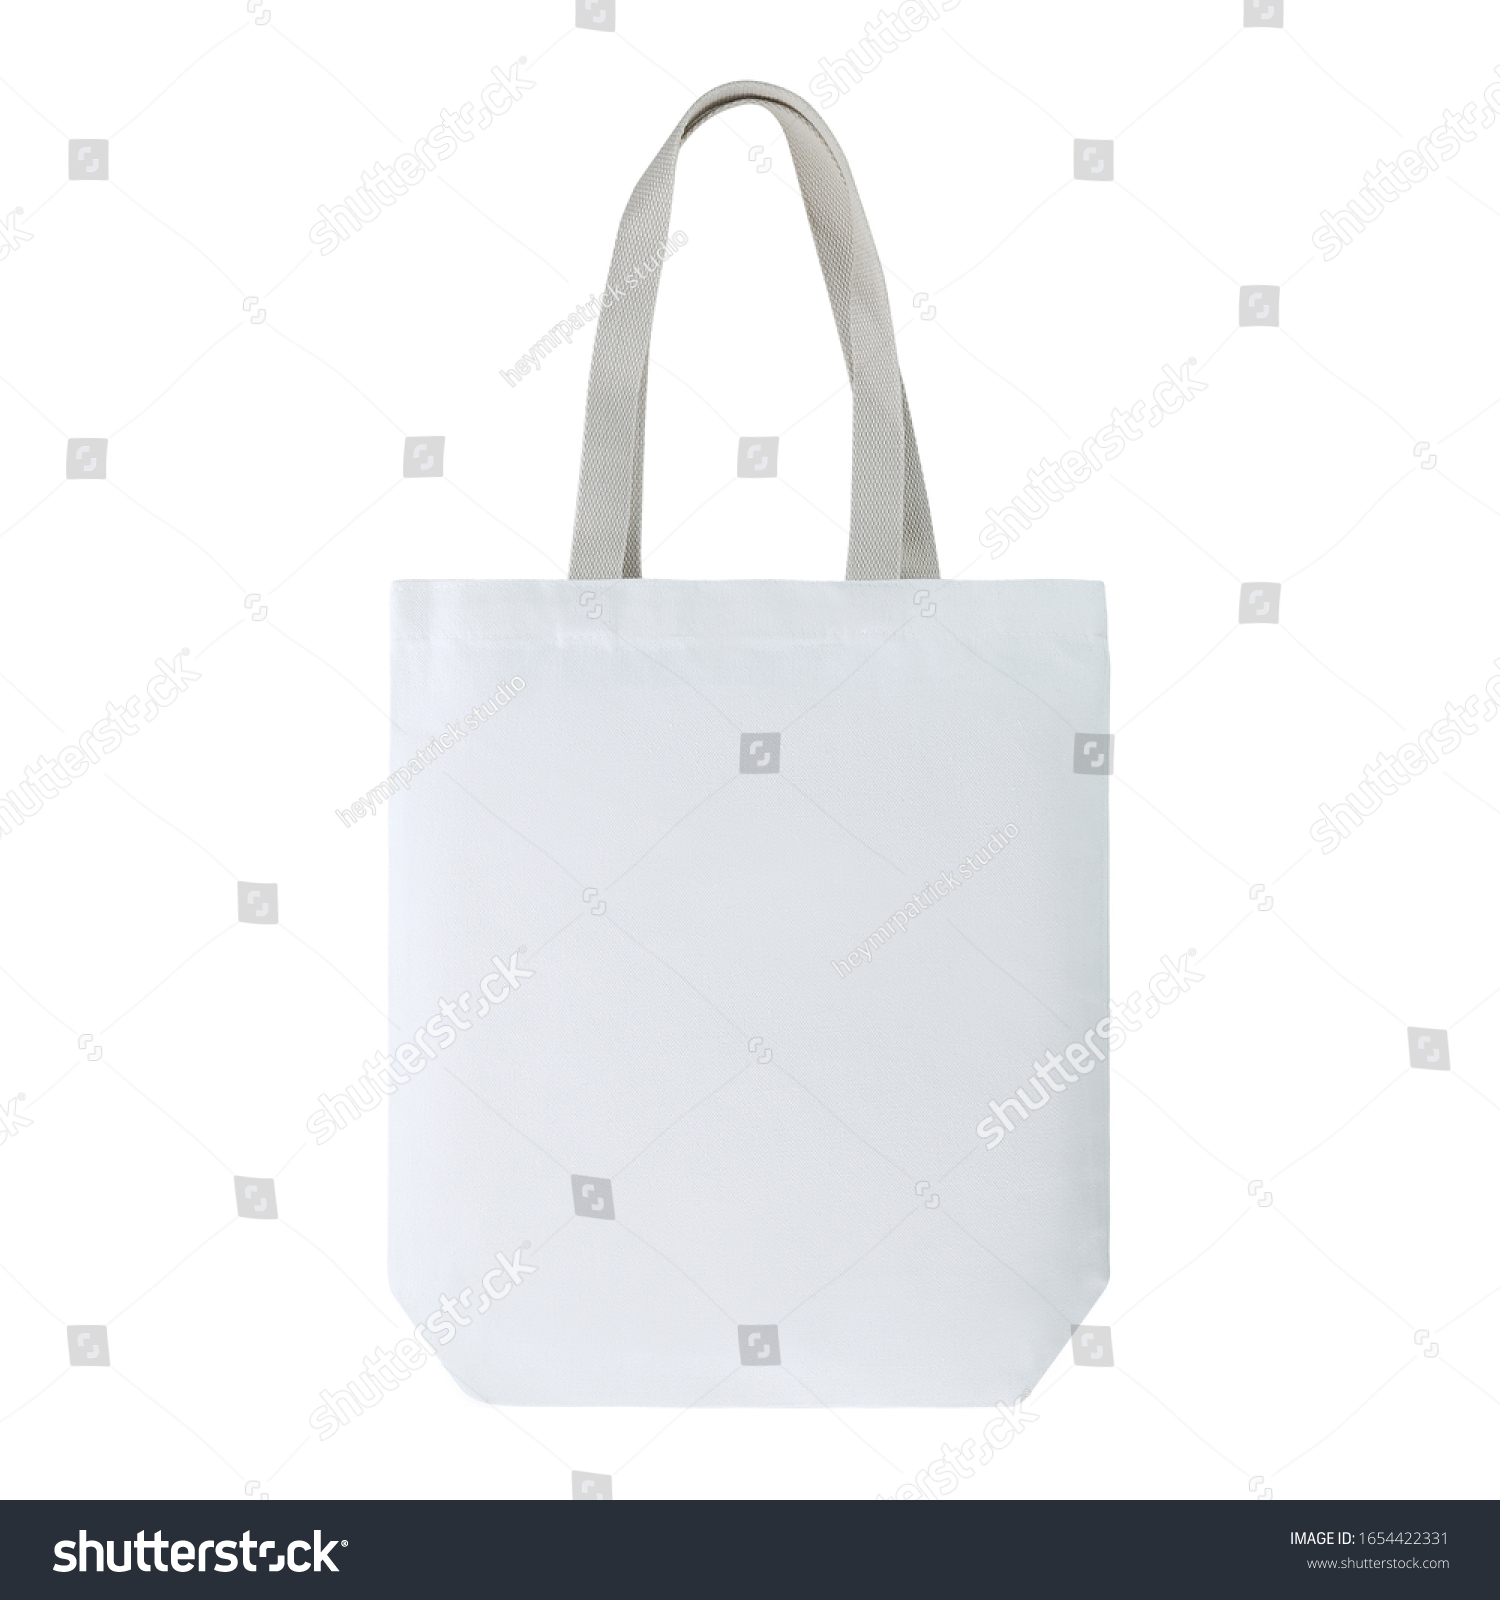 White colour fashion canvas recycled tote bag with cotton woven handle. Match with casual outfit. Suit for shopping & gathering, groceries and even as a gift. Design Template for Mock-up, advertising. #1654422331